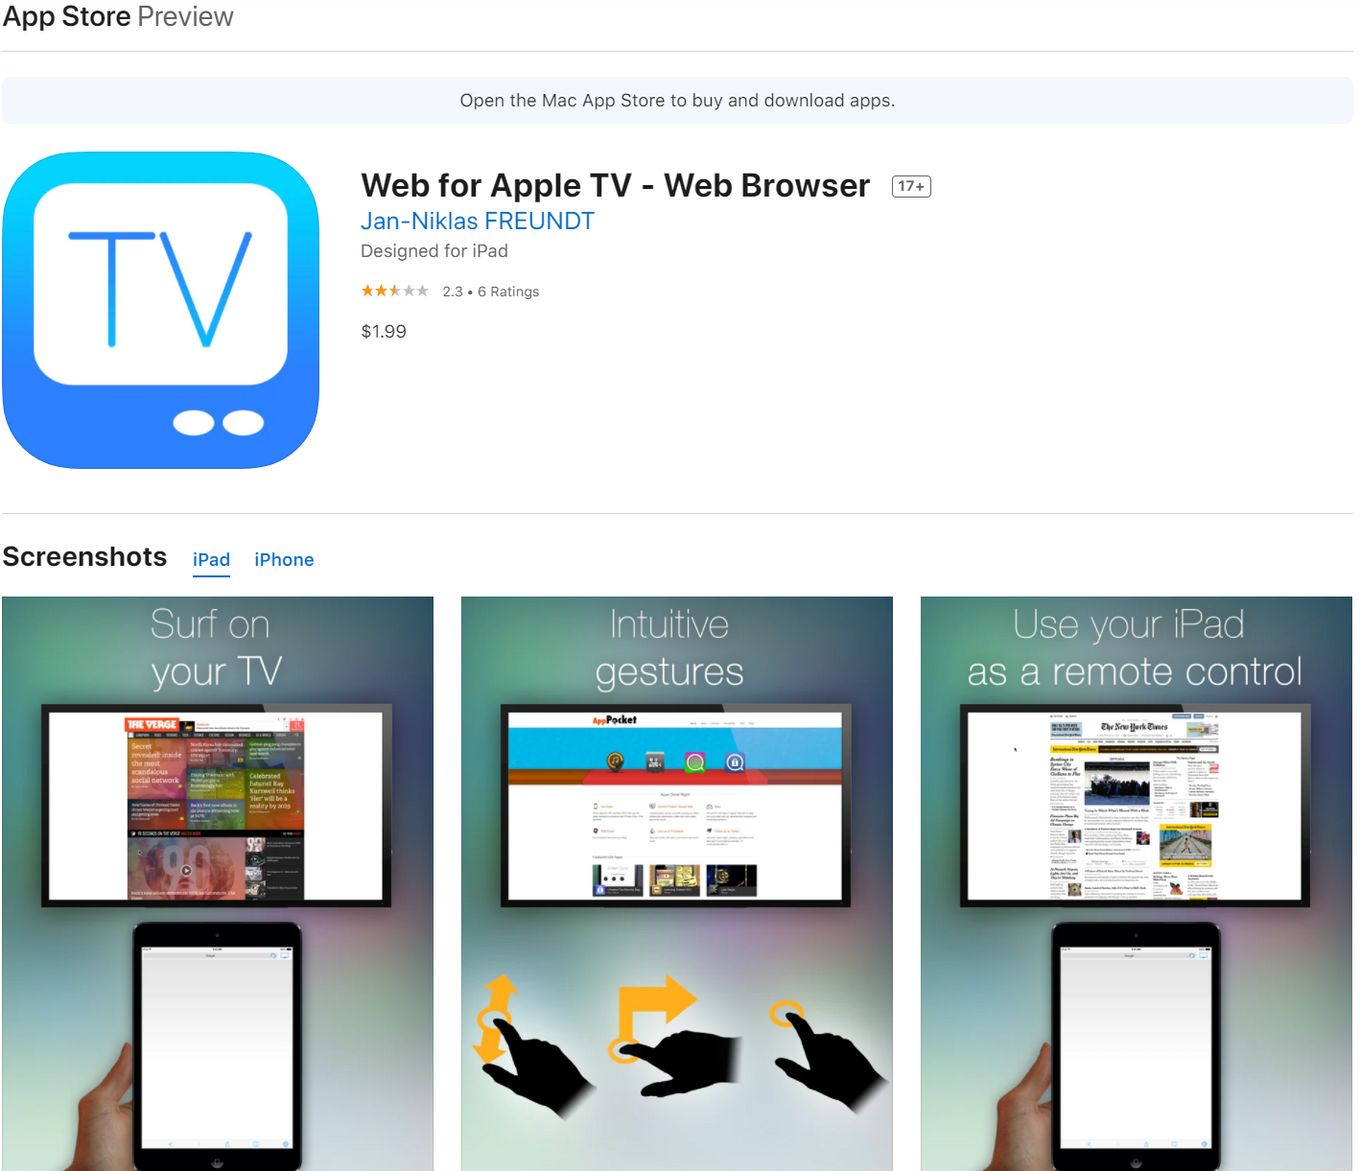 Web For Apple TV - App for Apple TV To Use Web Browser